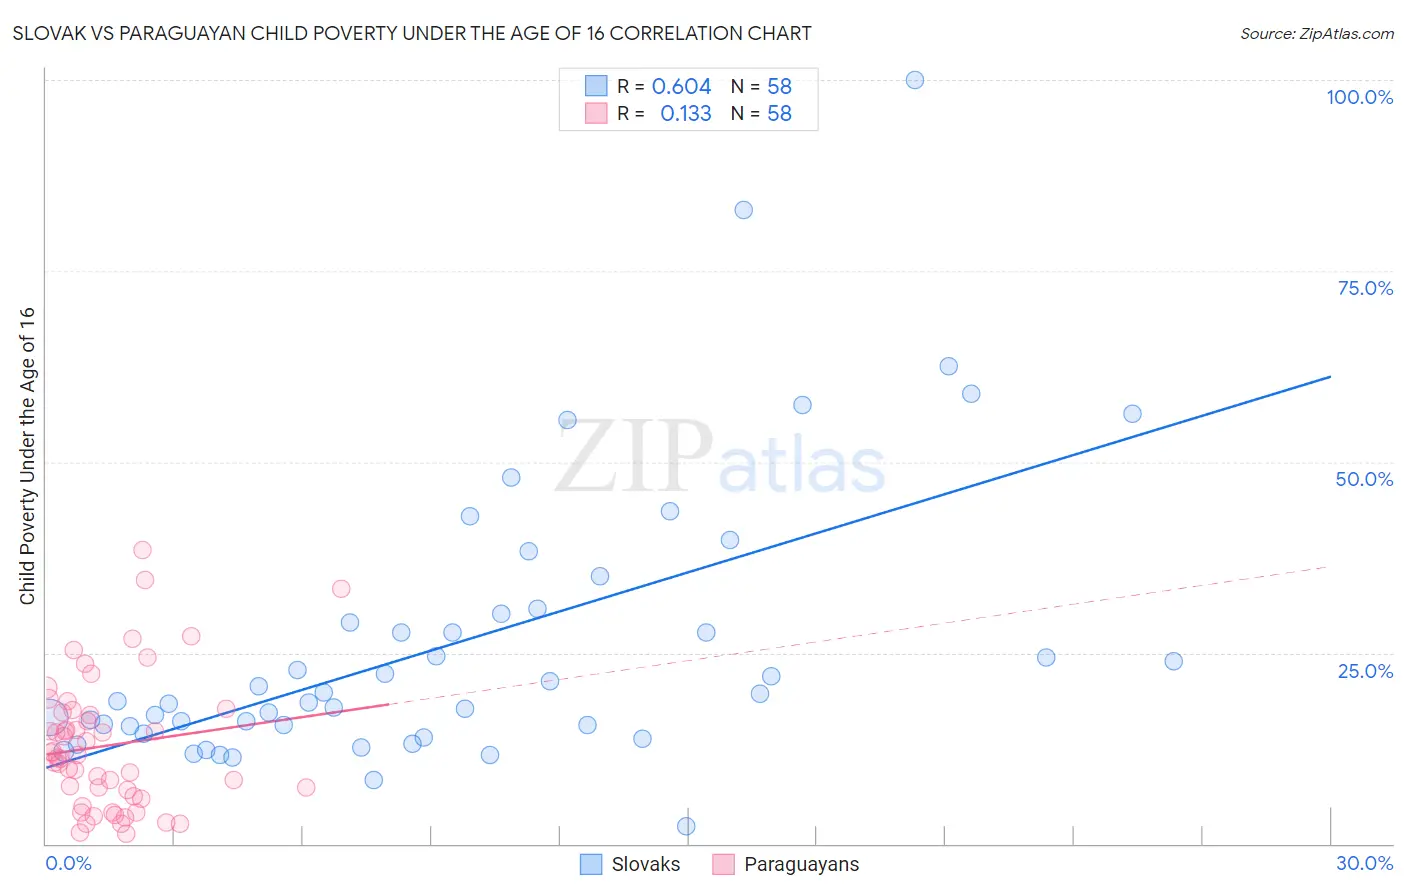 Slovak vs Paraguayan Child Poverty Under the Age of 16